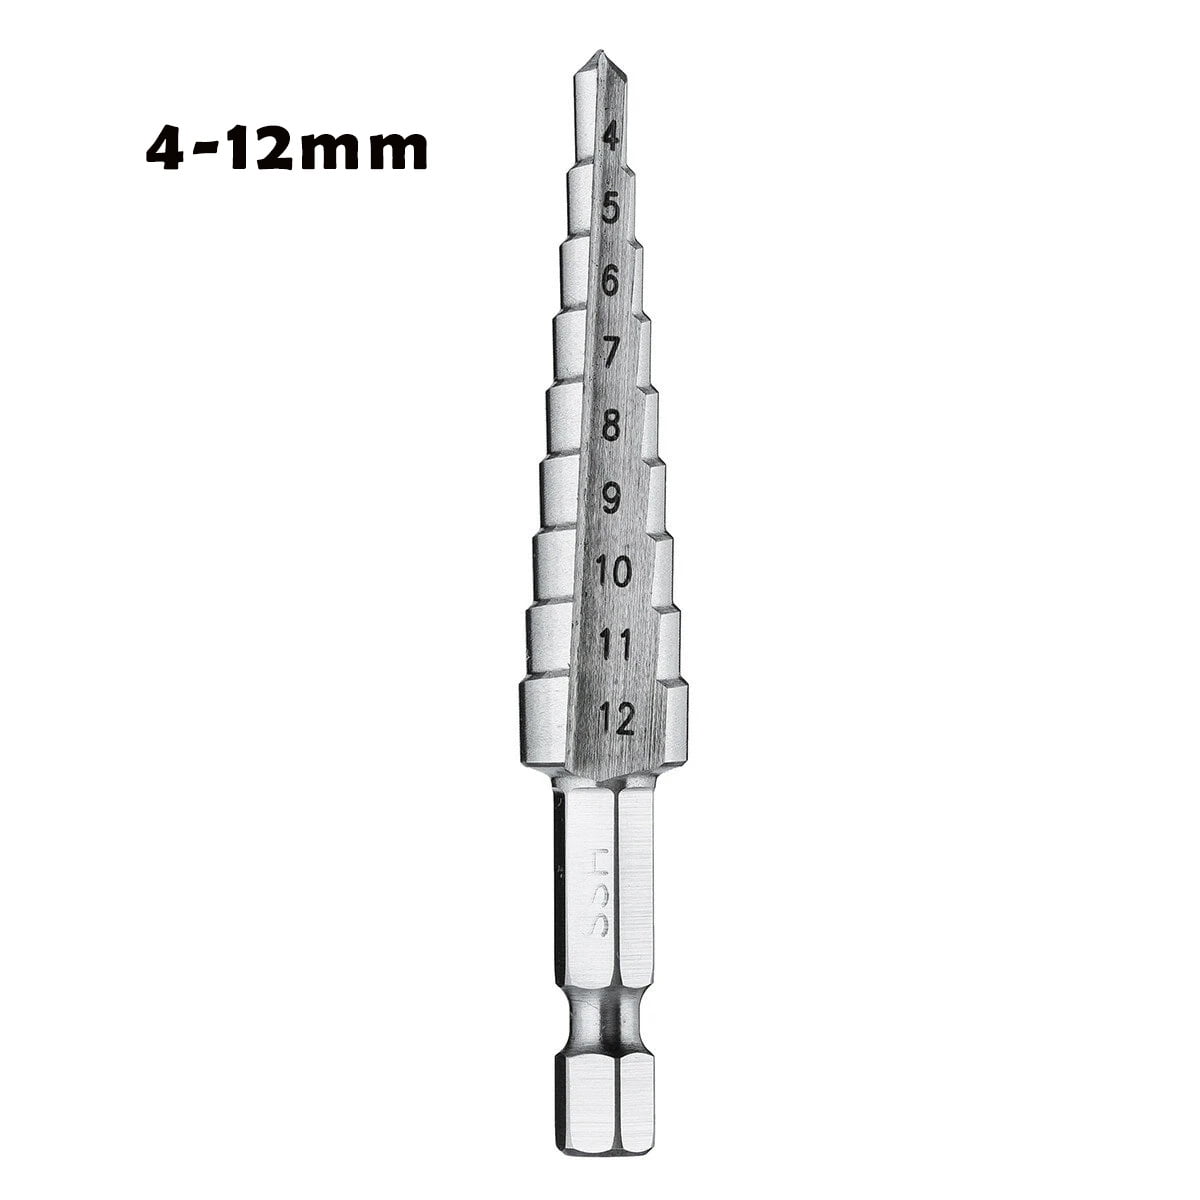 Details about   5Pc Tungsten Carbide Tip Tile Drill Bits for Porcelain Ceramic Glass 6/8/10/12mm 